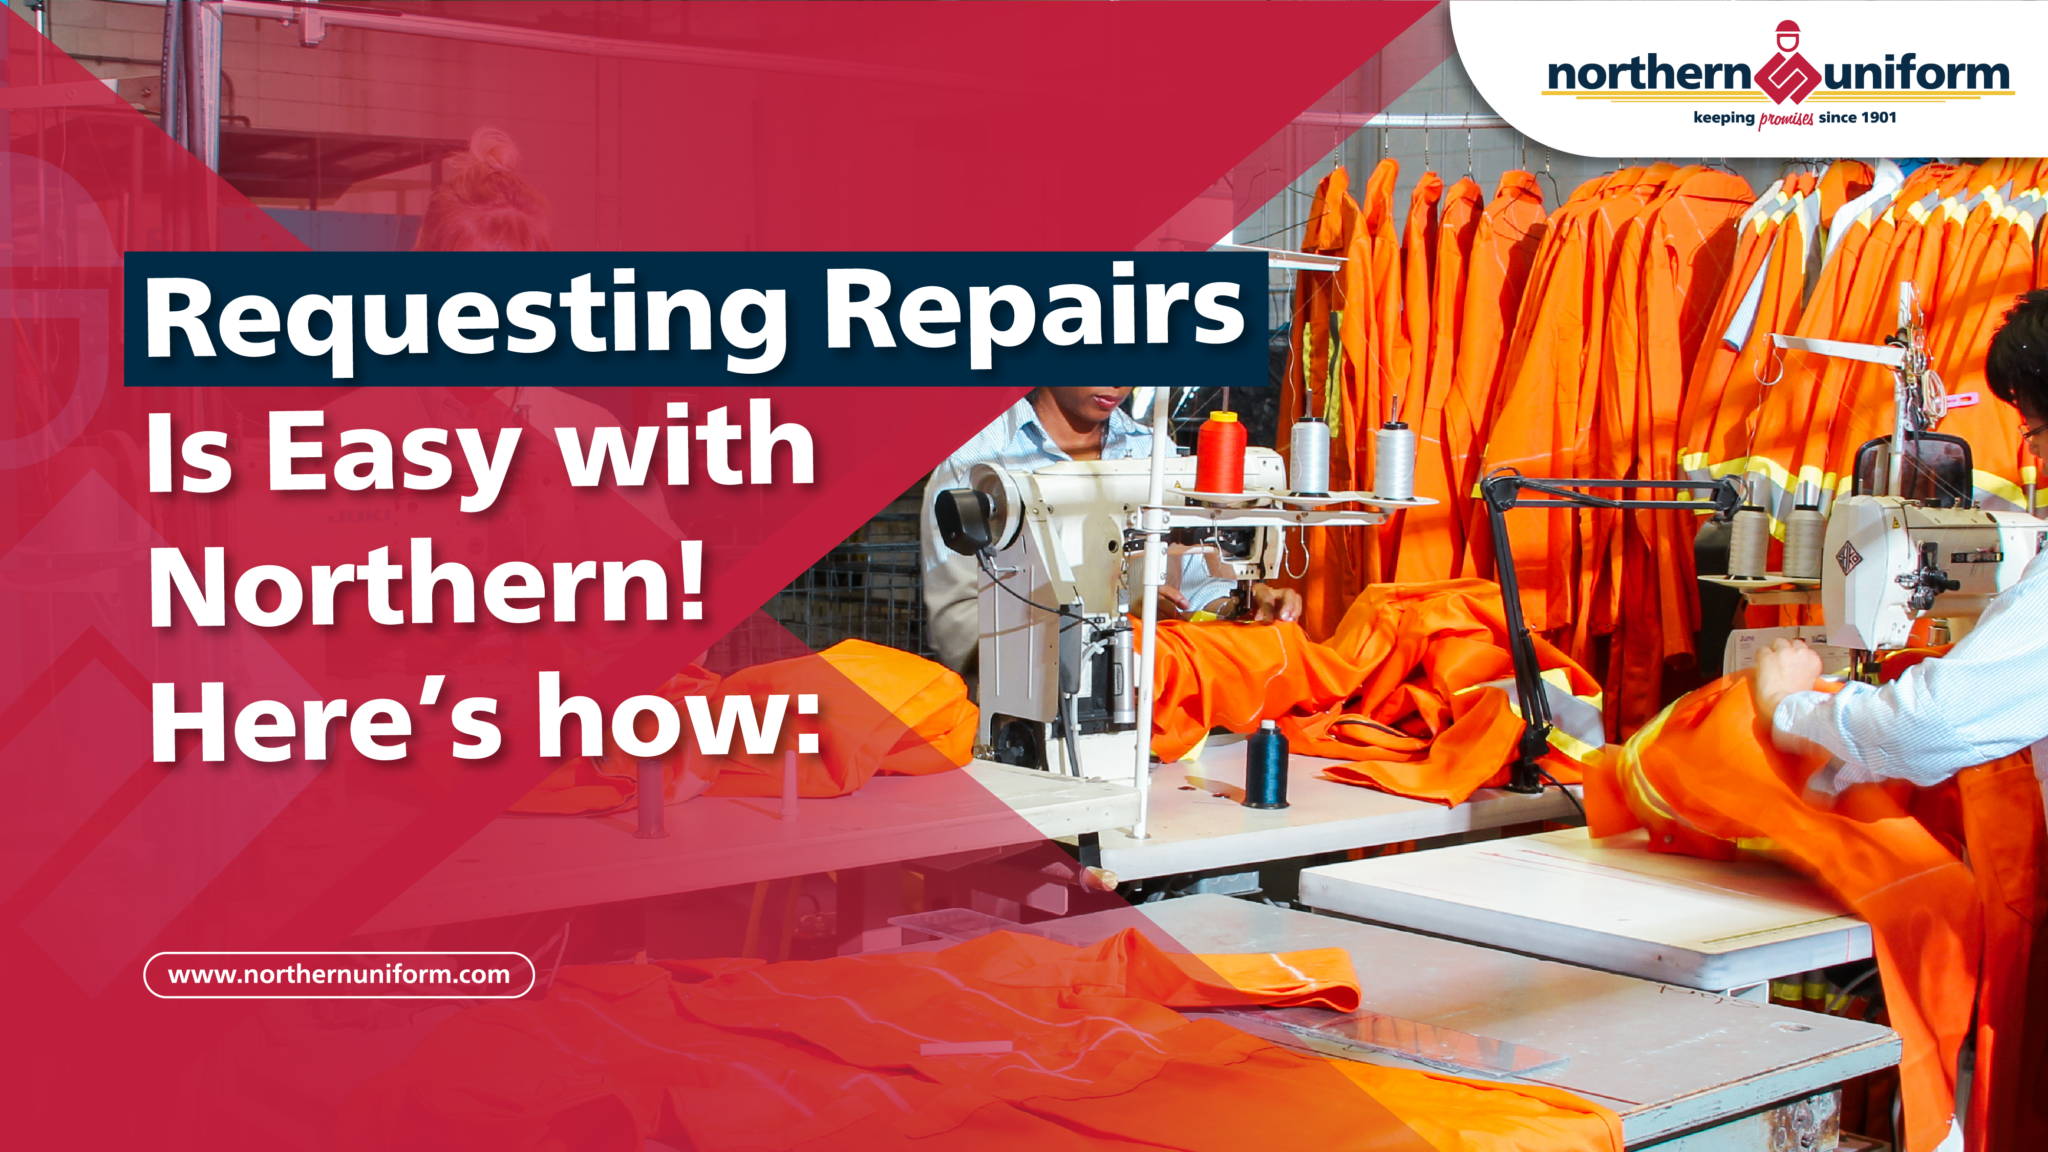 Northern Uniform Blog | Requesting Uniform Repairs is easy with us